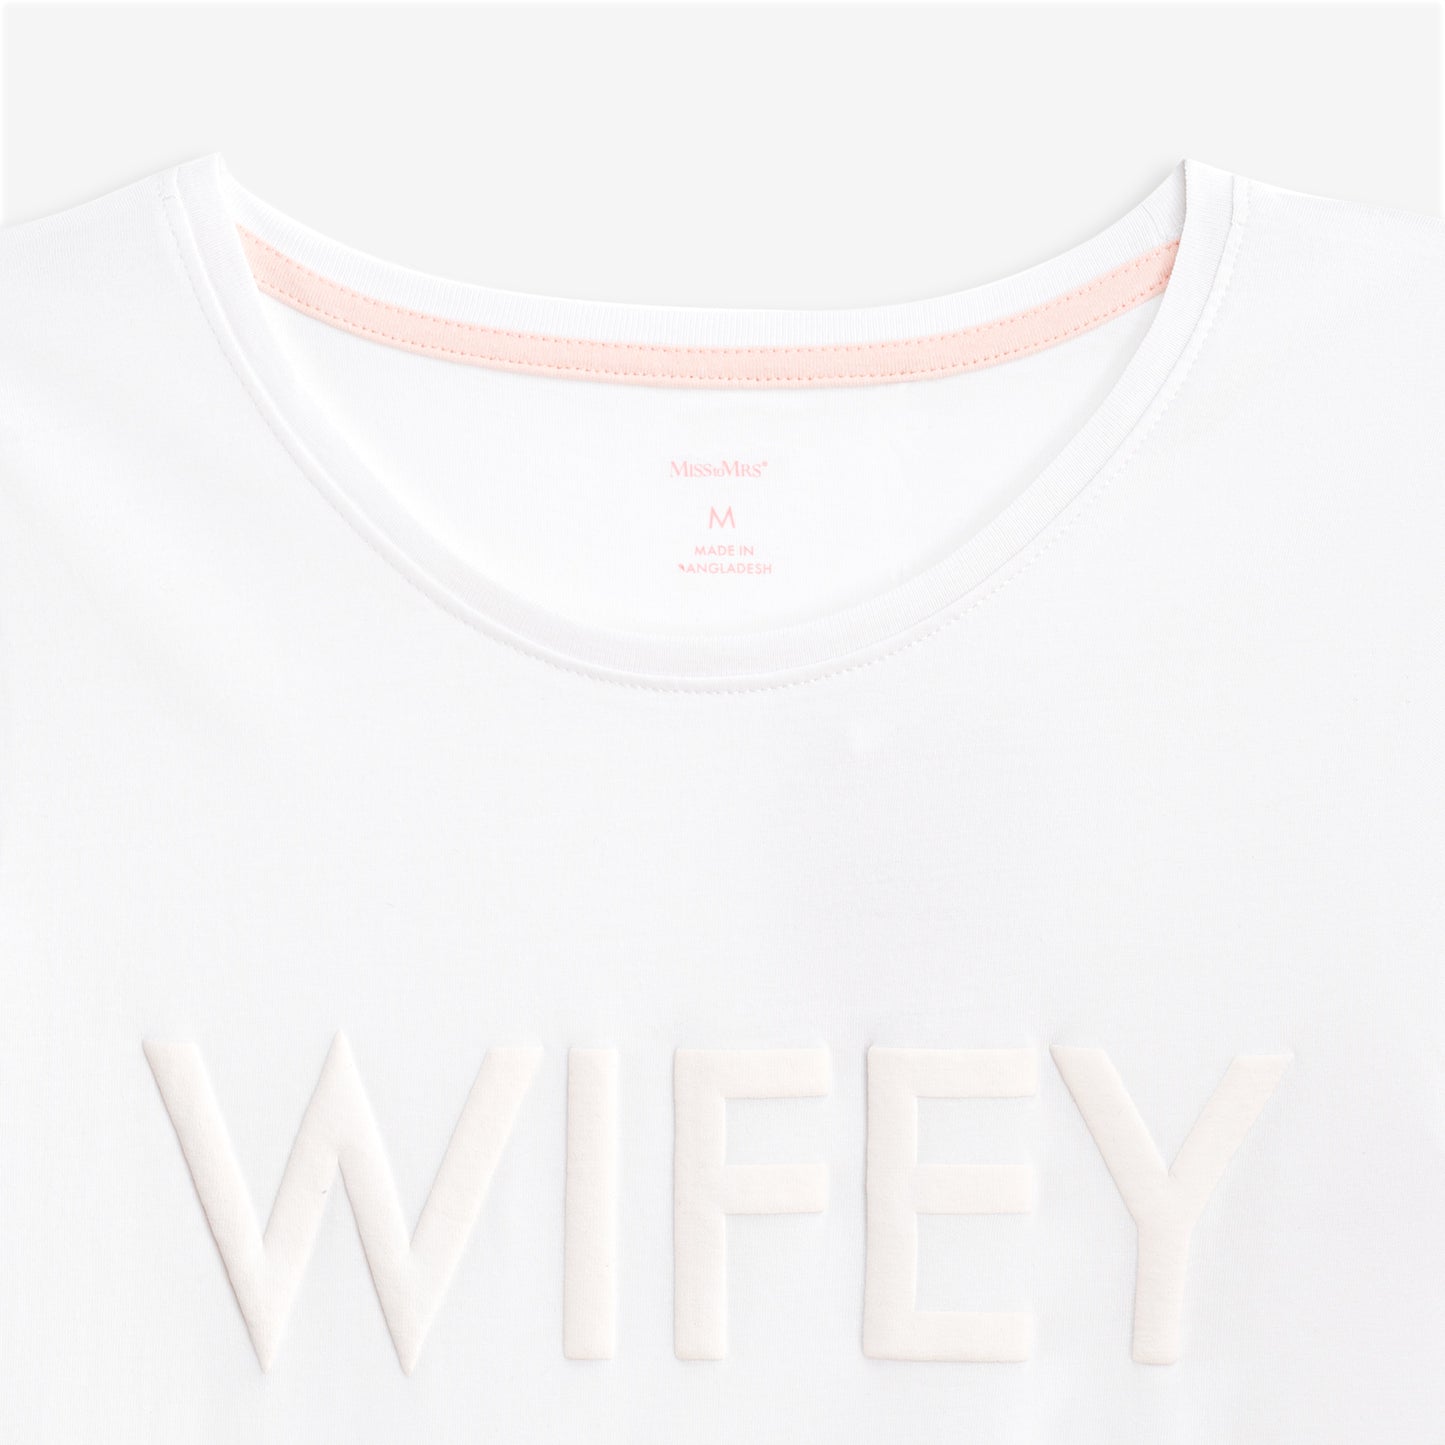 Hubby and Wifey Puff Print T-shirt Set. Crewneck t-shirts made of high-quality 100% cotton, black Hubby t-shirt and white Wifey t-shirt.